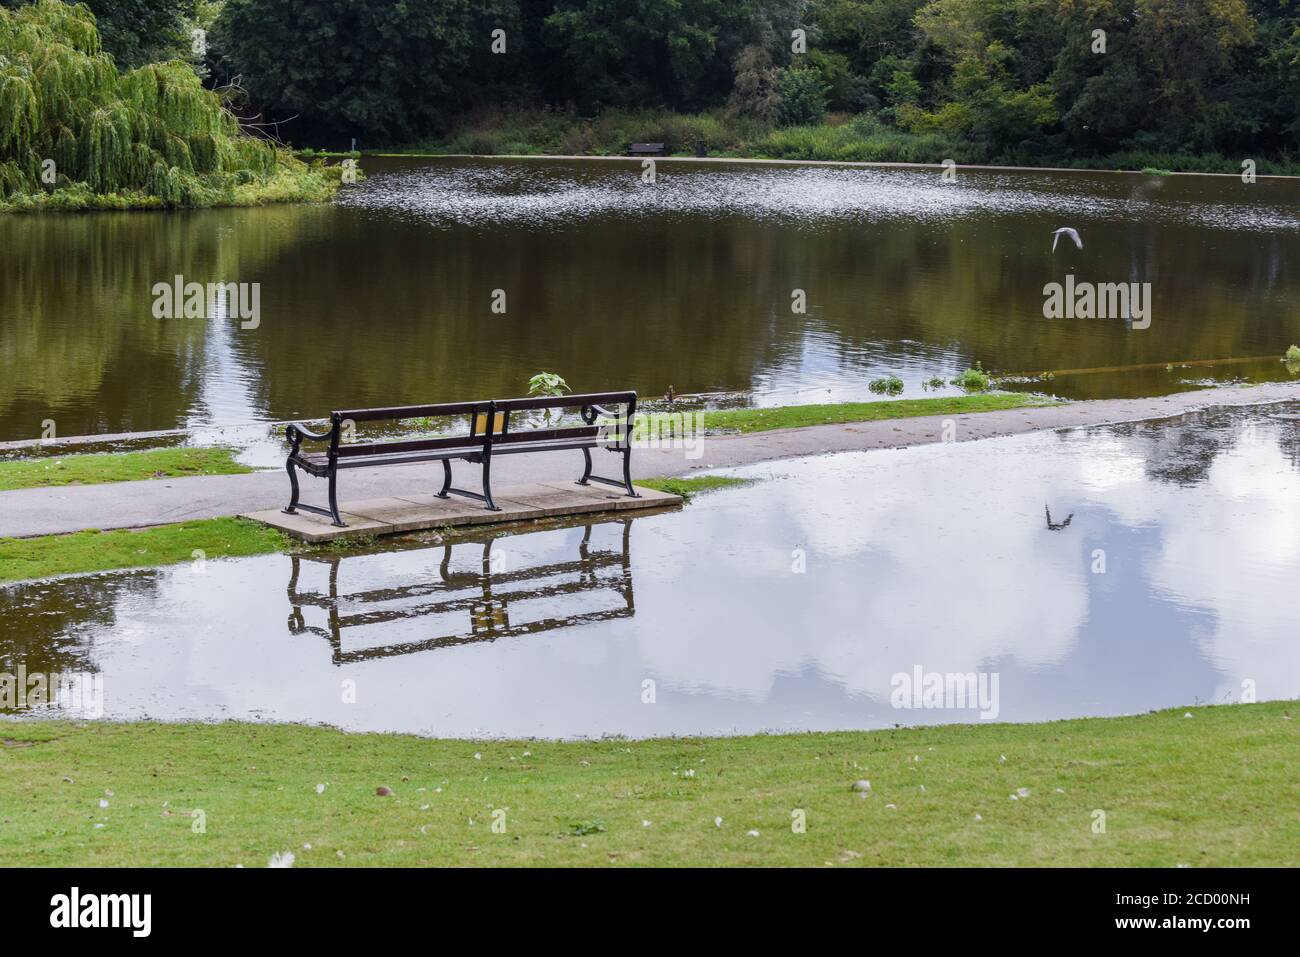 Flood water overflows from a lake during flooding after heavy rain and bad weather Stock Photo